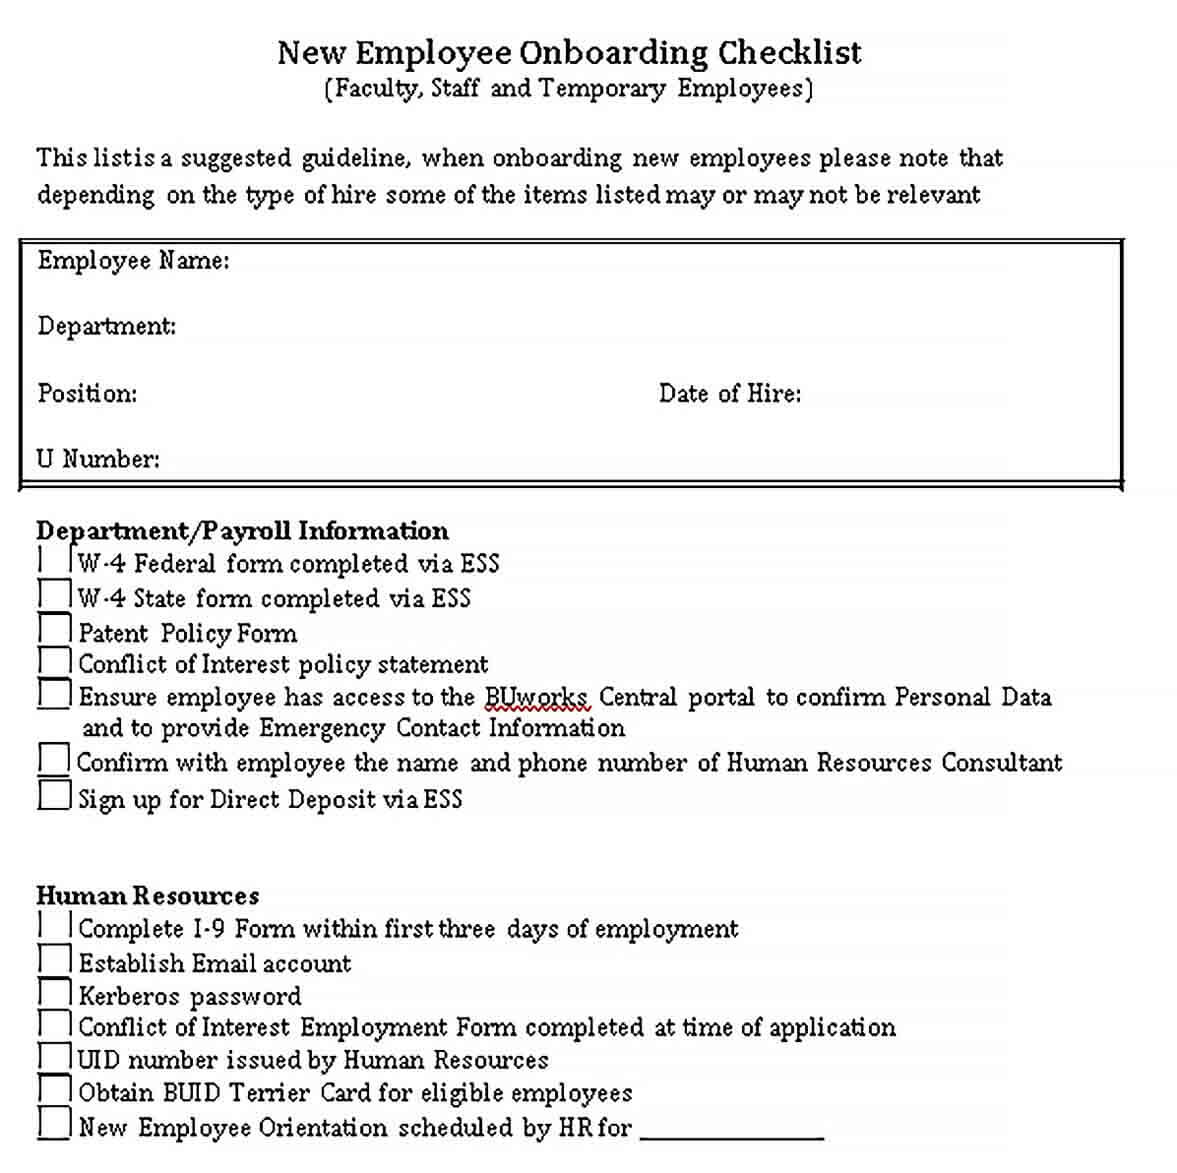 Sample New Employee Onboarding Checklist Template